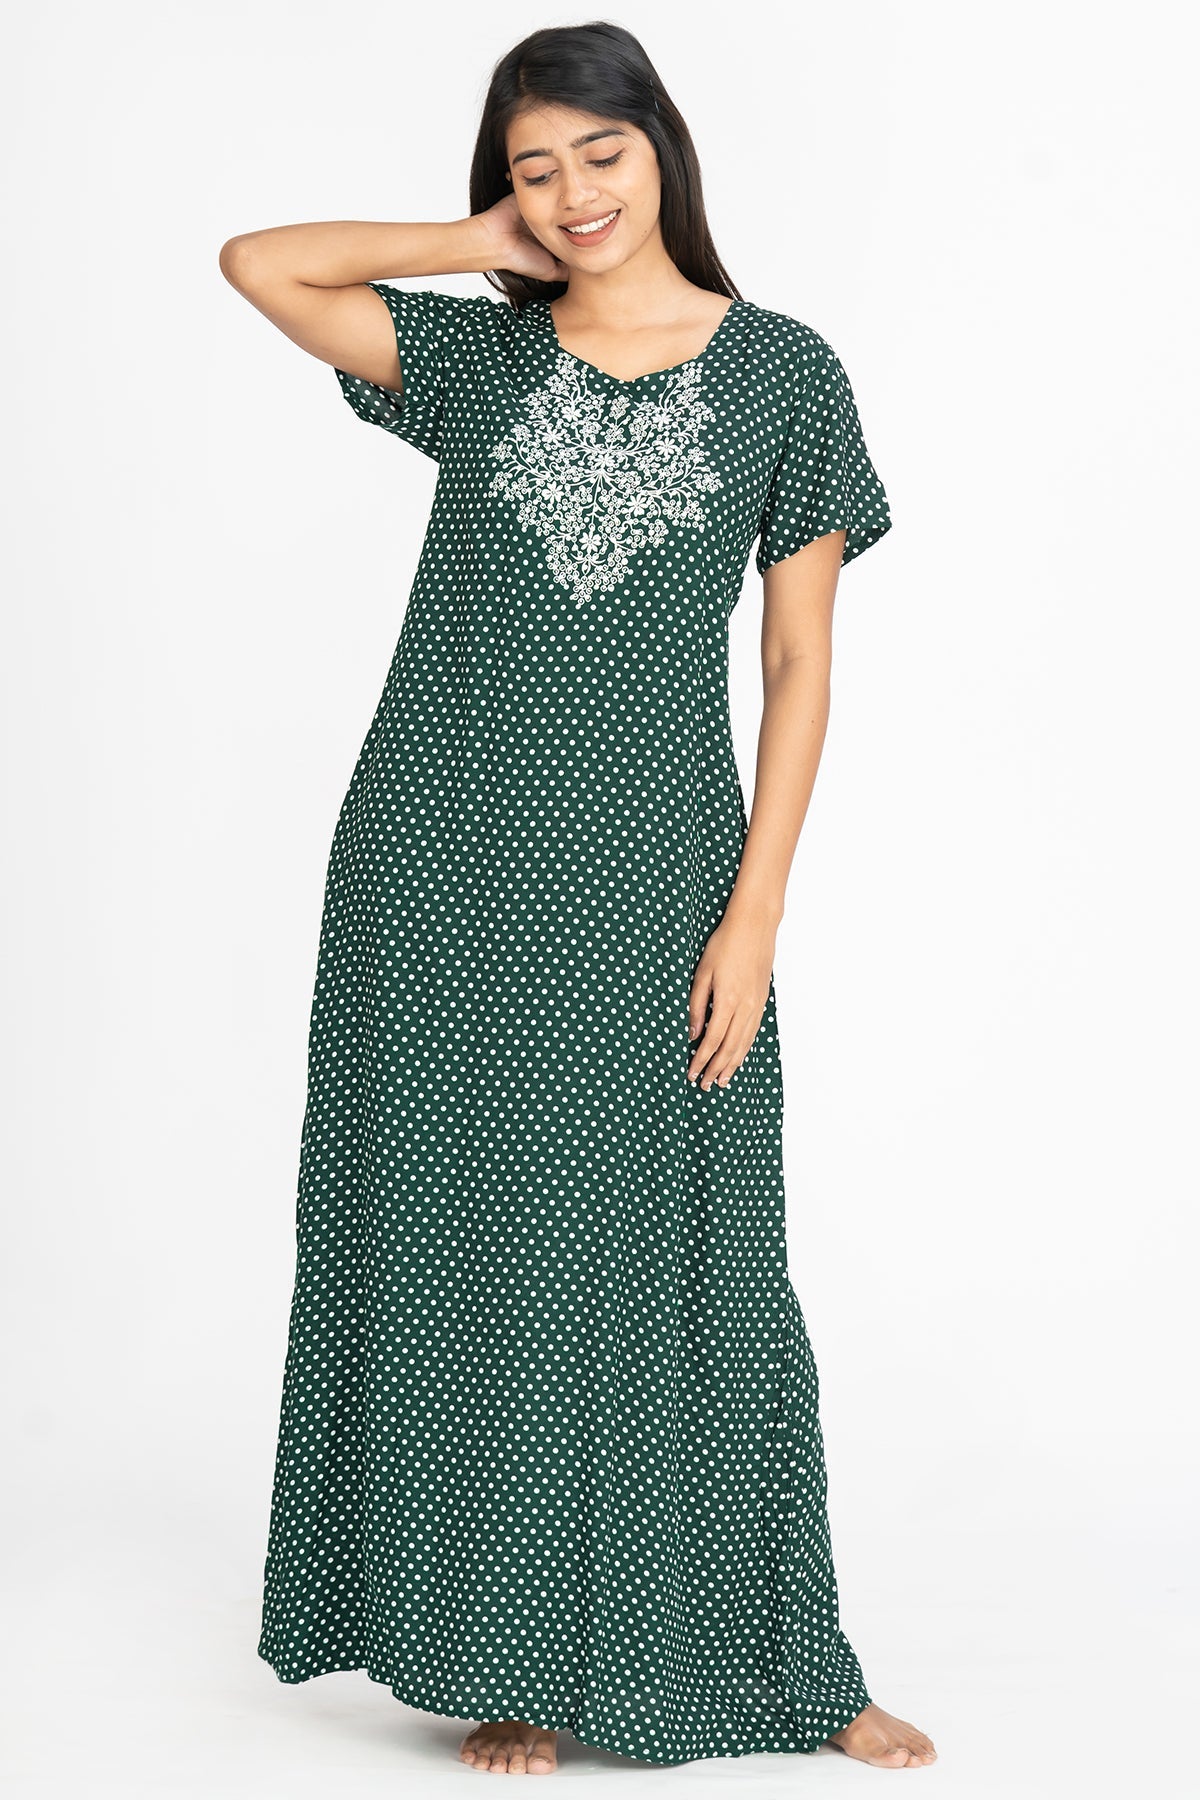 All Over Polka Dot Print With Contrast Floral Embroidered Yoke Nighty Green